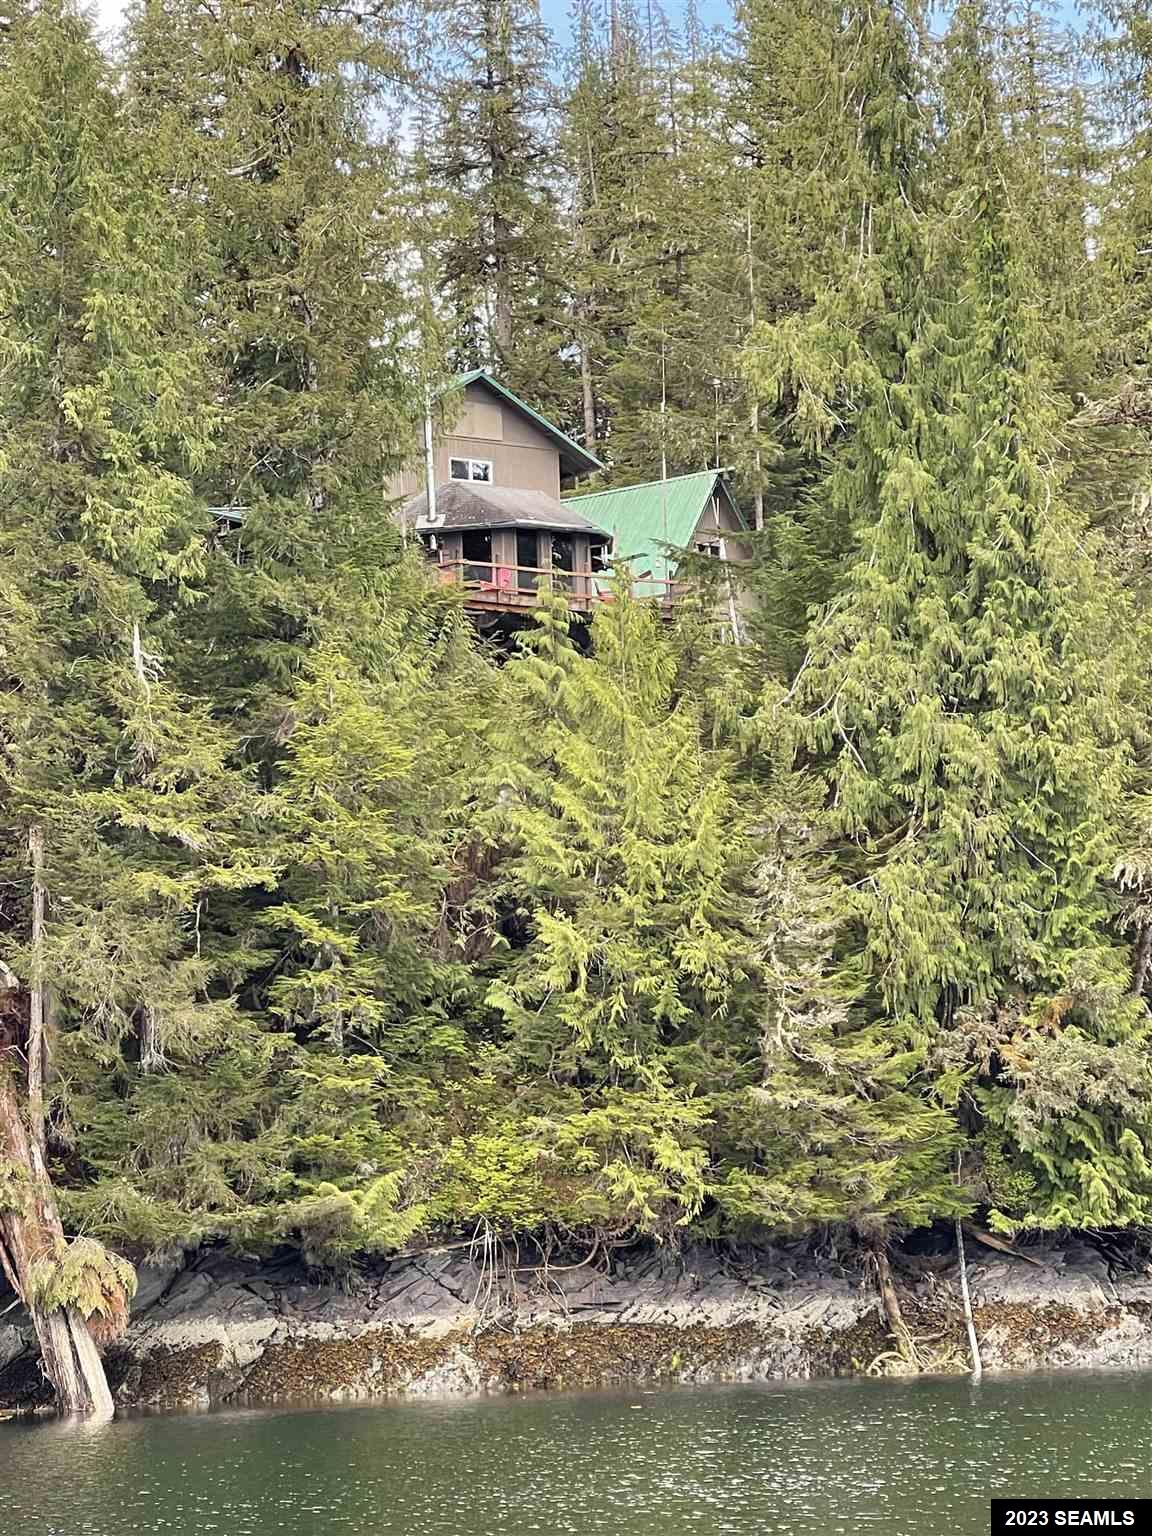 Legal Address Only, Ketchikan, AK 99901, 2 Bedrooms Bedrooms, ,2 BathroomsBathrooms,Residential,For Sale,Legal Address Only,23338